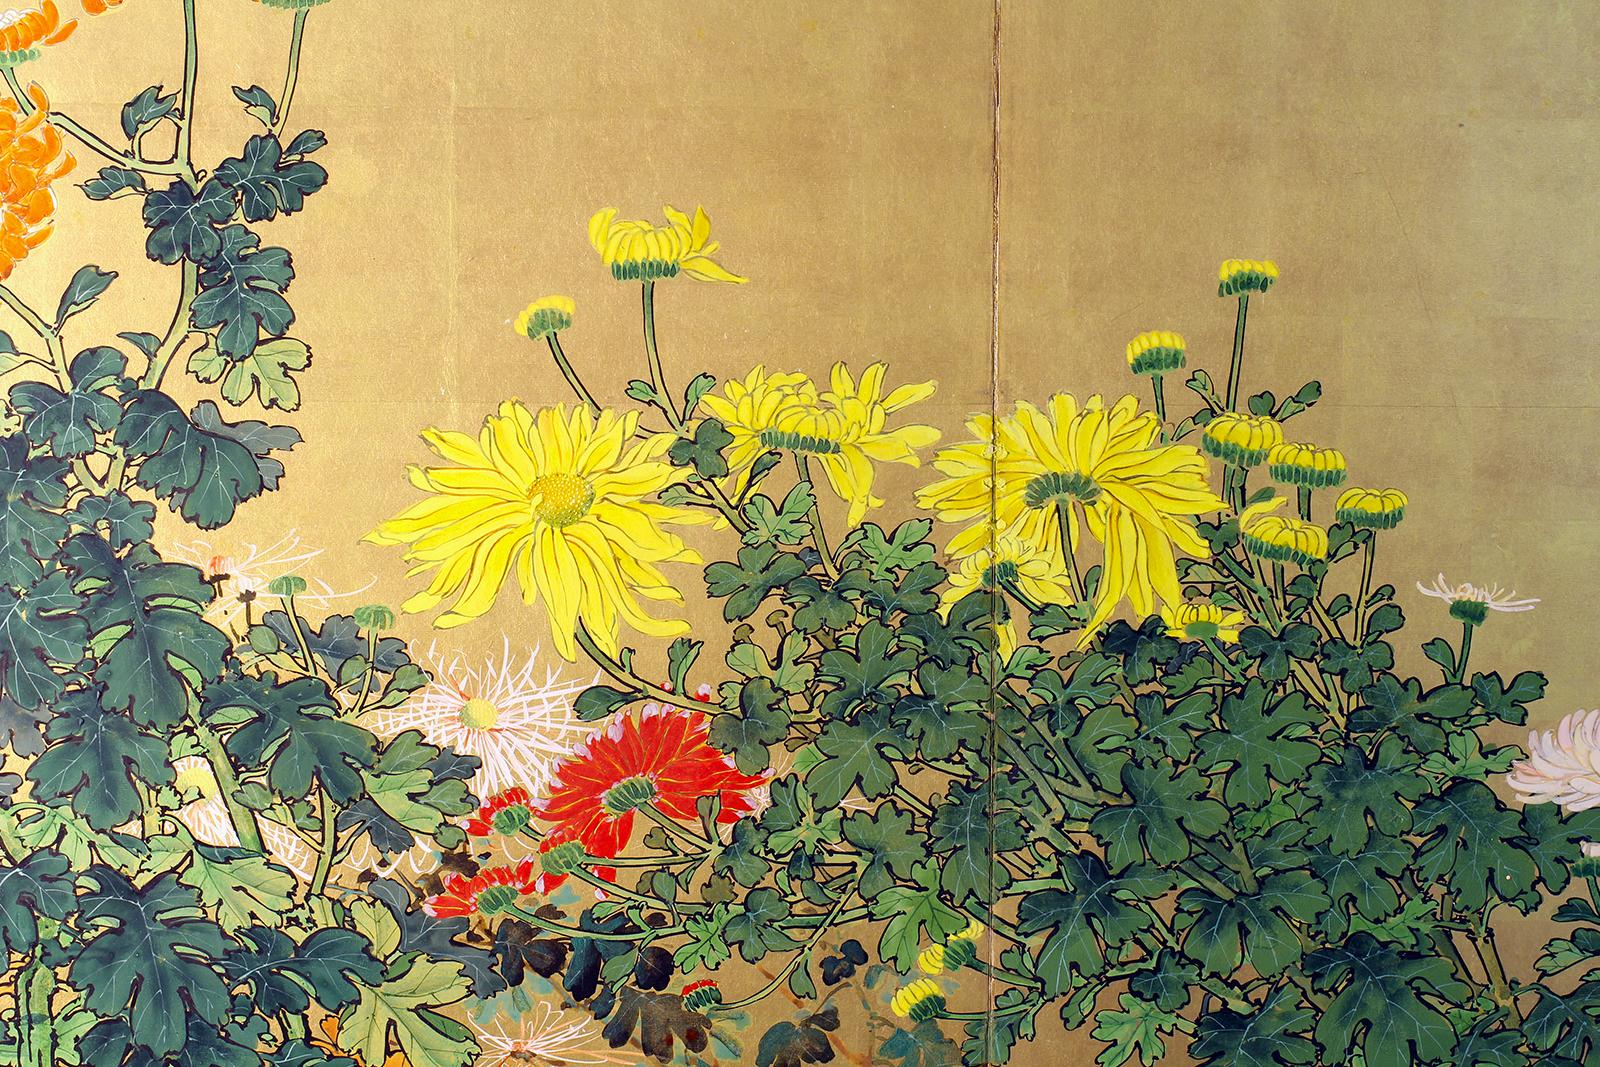 Spring landscape by an unknown painter of the Rinpa school, XX th century, six-panel ink painted on gold leaf on rice paper.
The flowers are made with the 